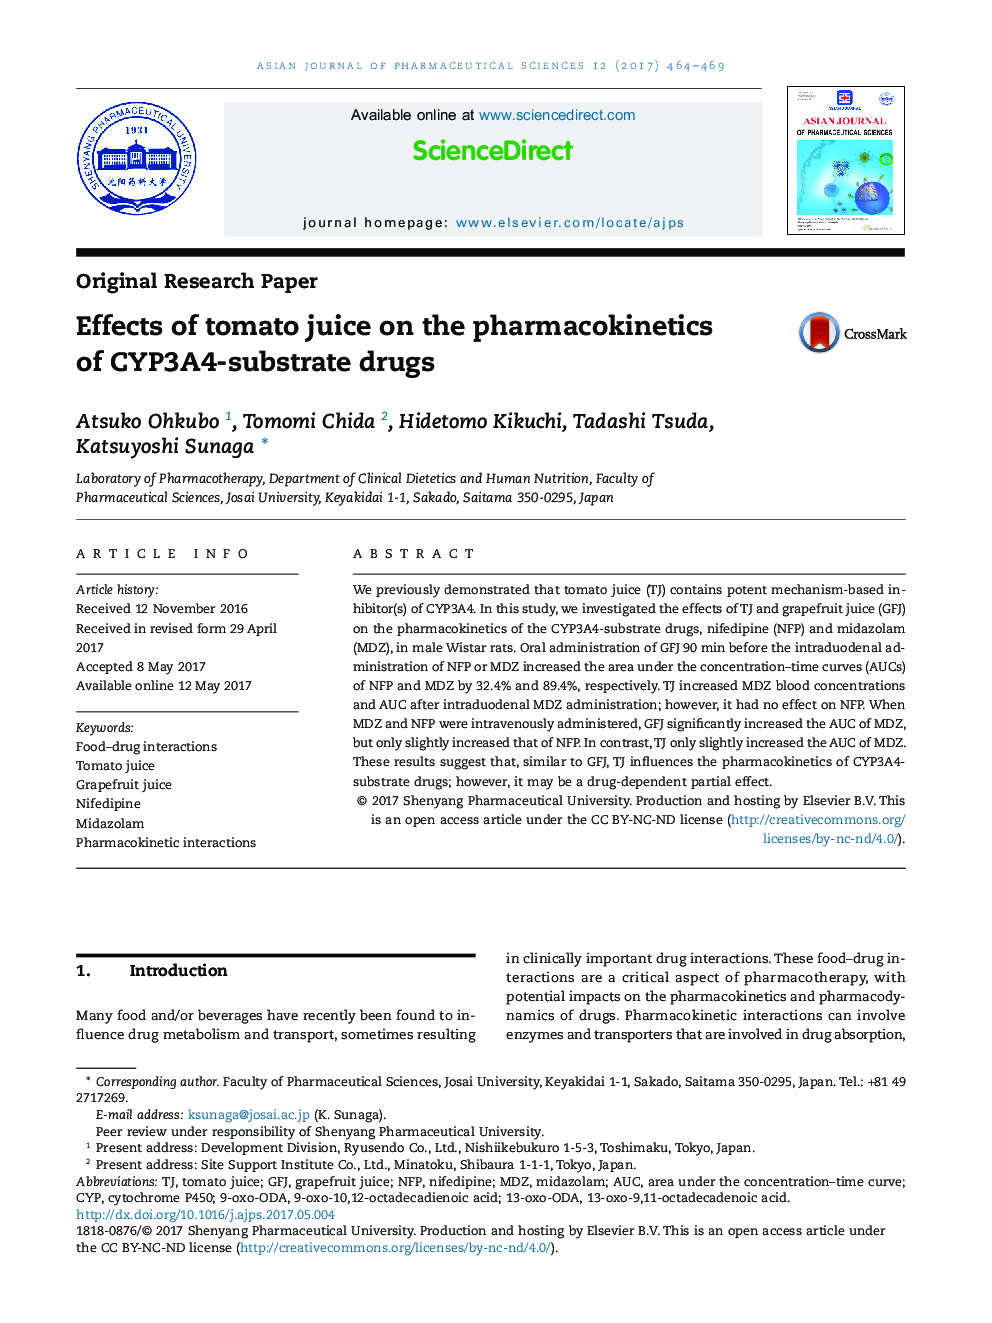 Effects of tomato juice on the pharmacokinetics of CYP3A4-substrate drugs